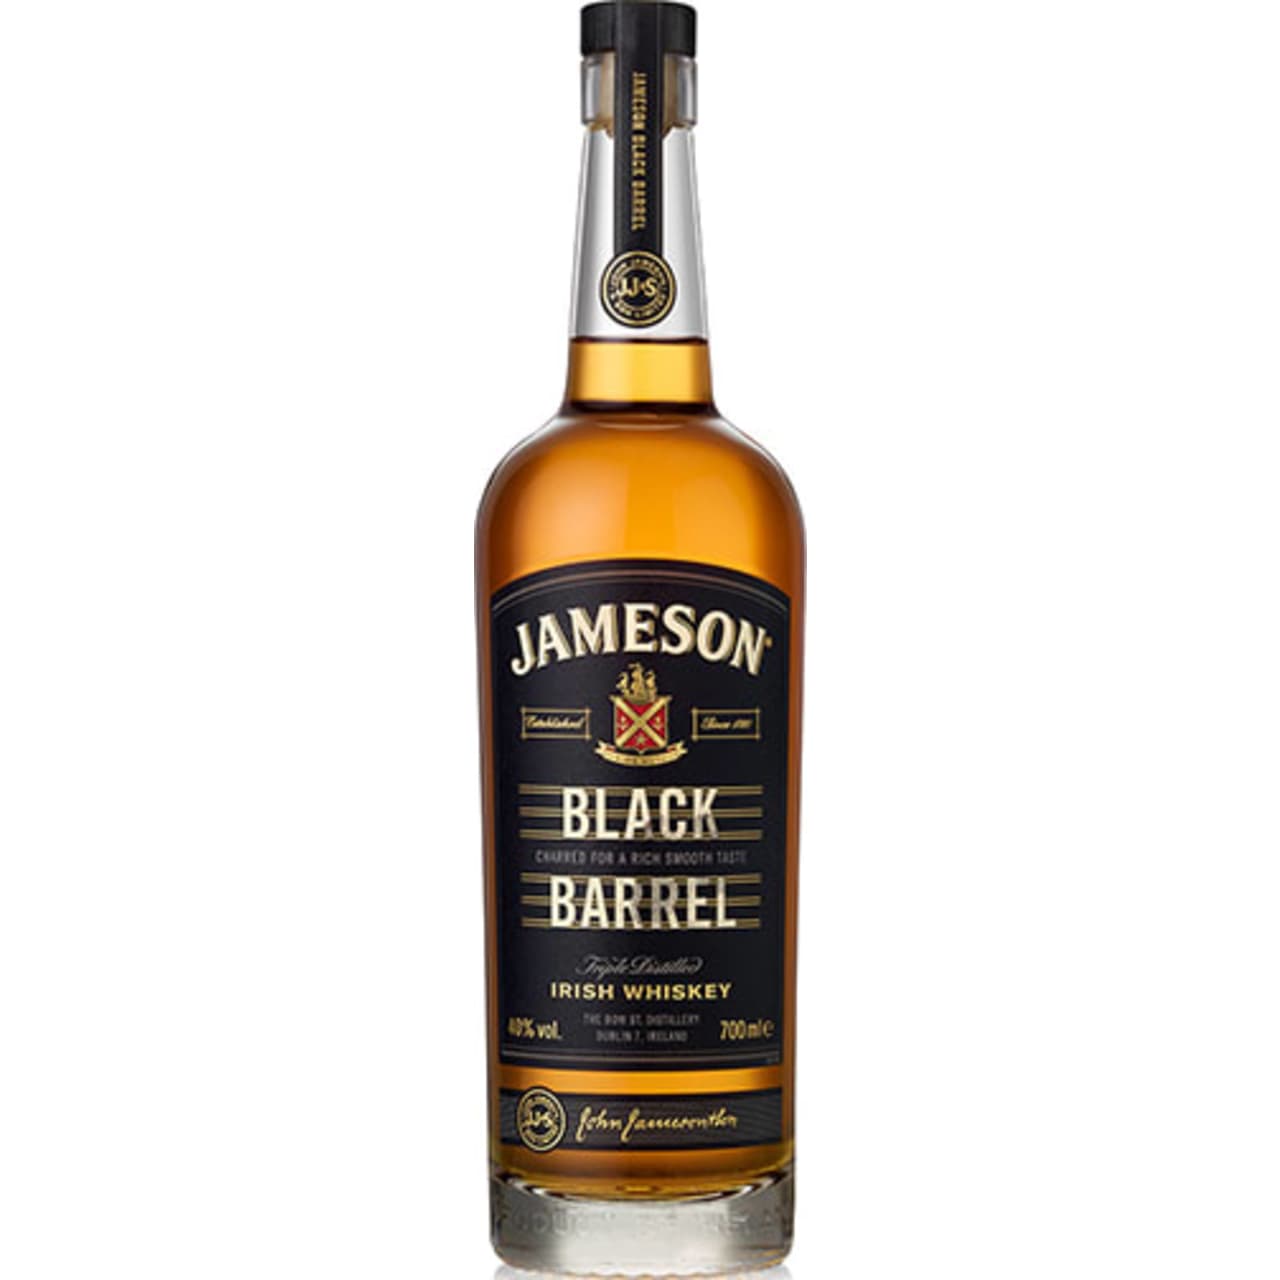 Jameson Black Barrel Irish Whiskey has a burst of flavours combined to produce a creamy and luscious taste experience. The special fruity sweetness from the grain remains consistent, while the waves of vanilla, toasted wood and spices roll through from the pot still whiskey and flame charred barrels.